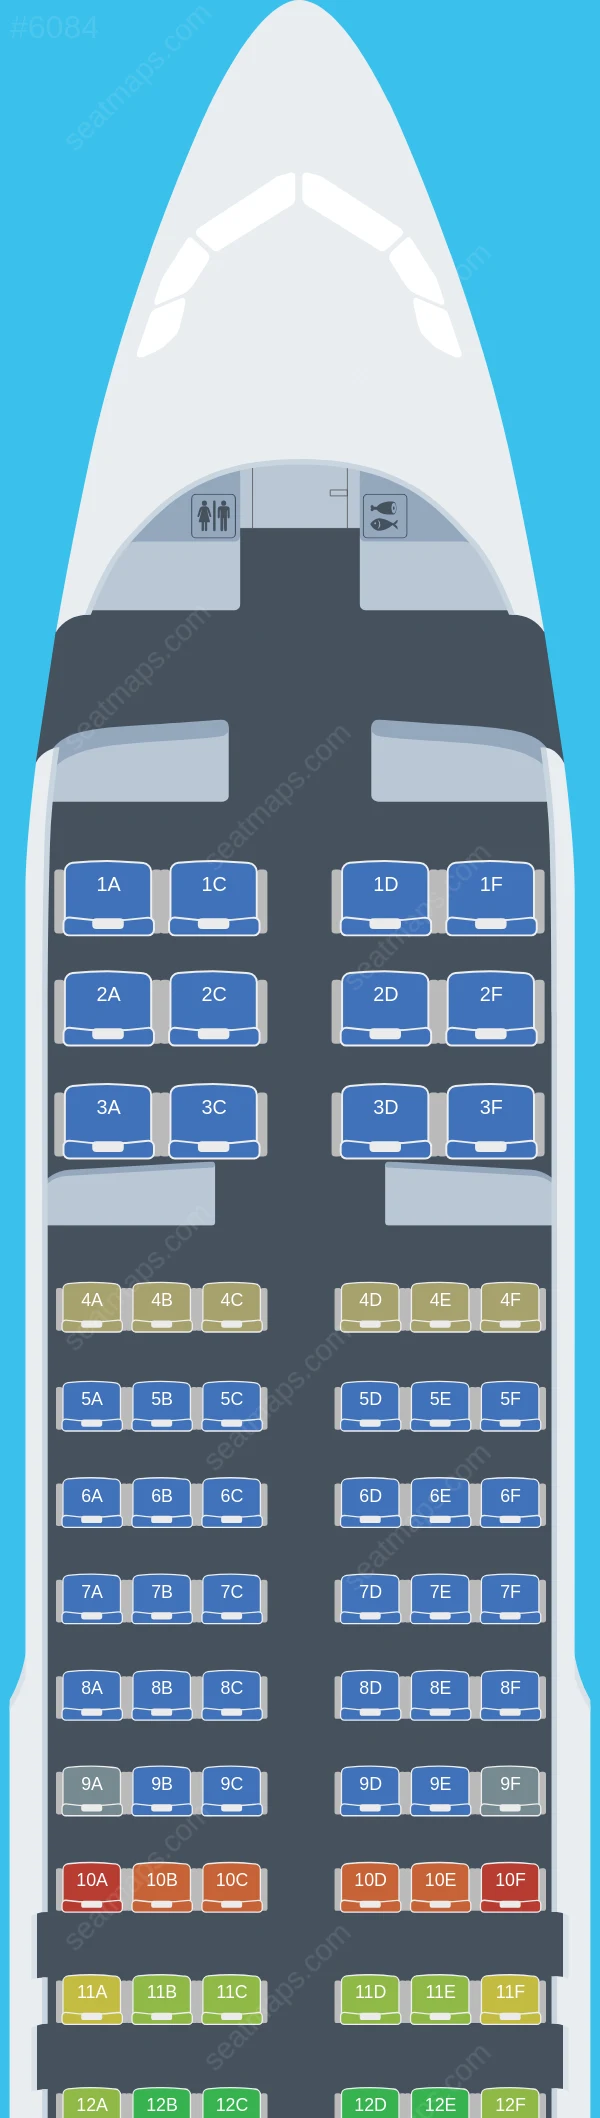 Rossiya Airbus A320-200 V.1 seatmap preview